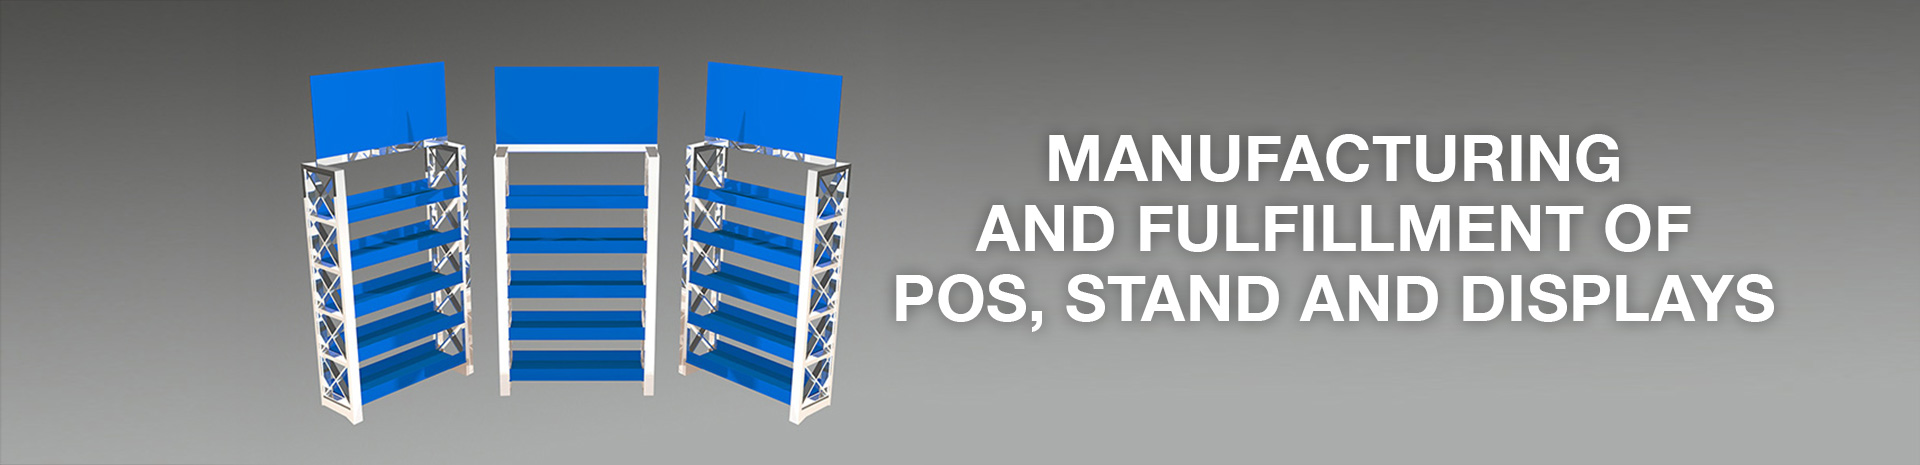 Manufacturing and fulfillment of POS, stand and displays